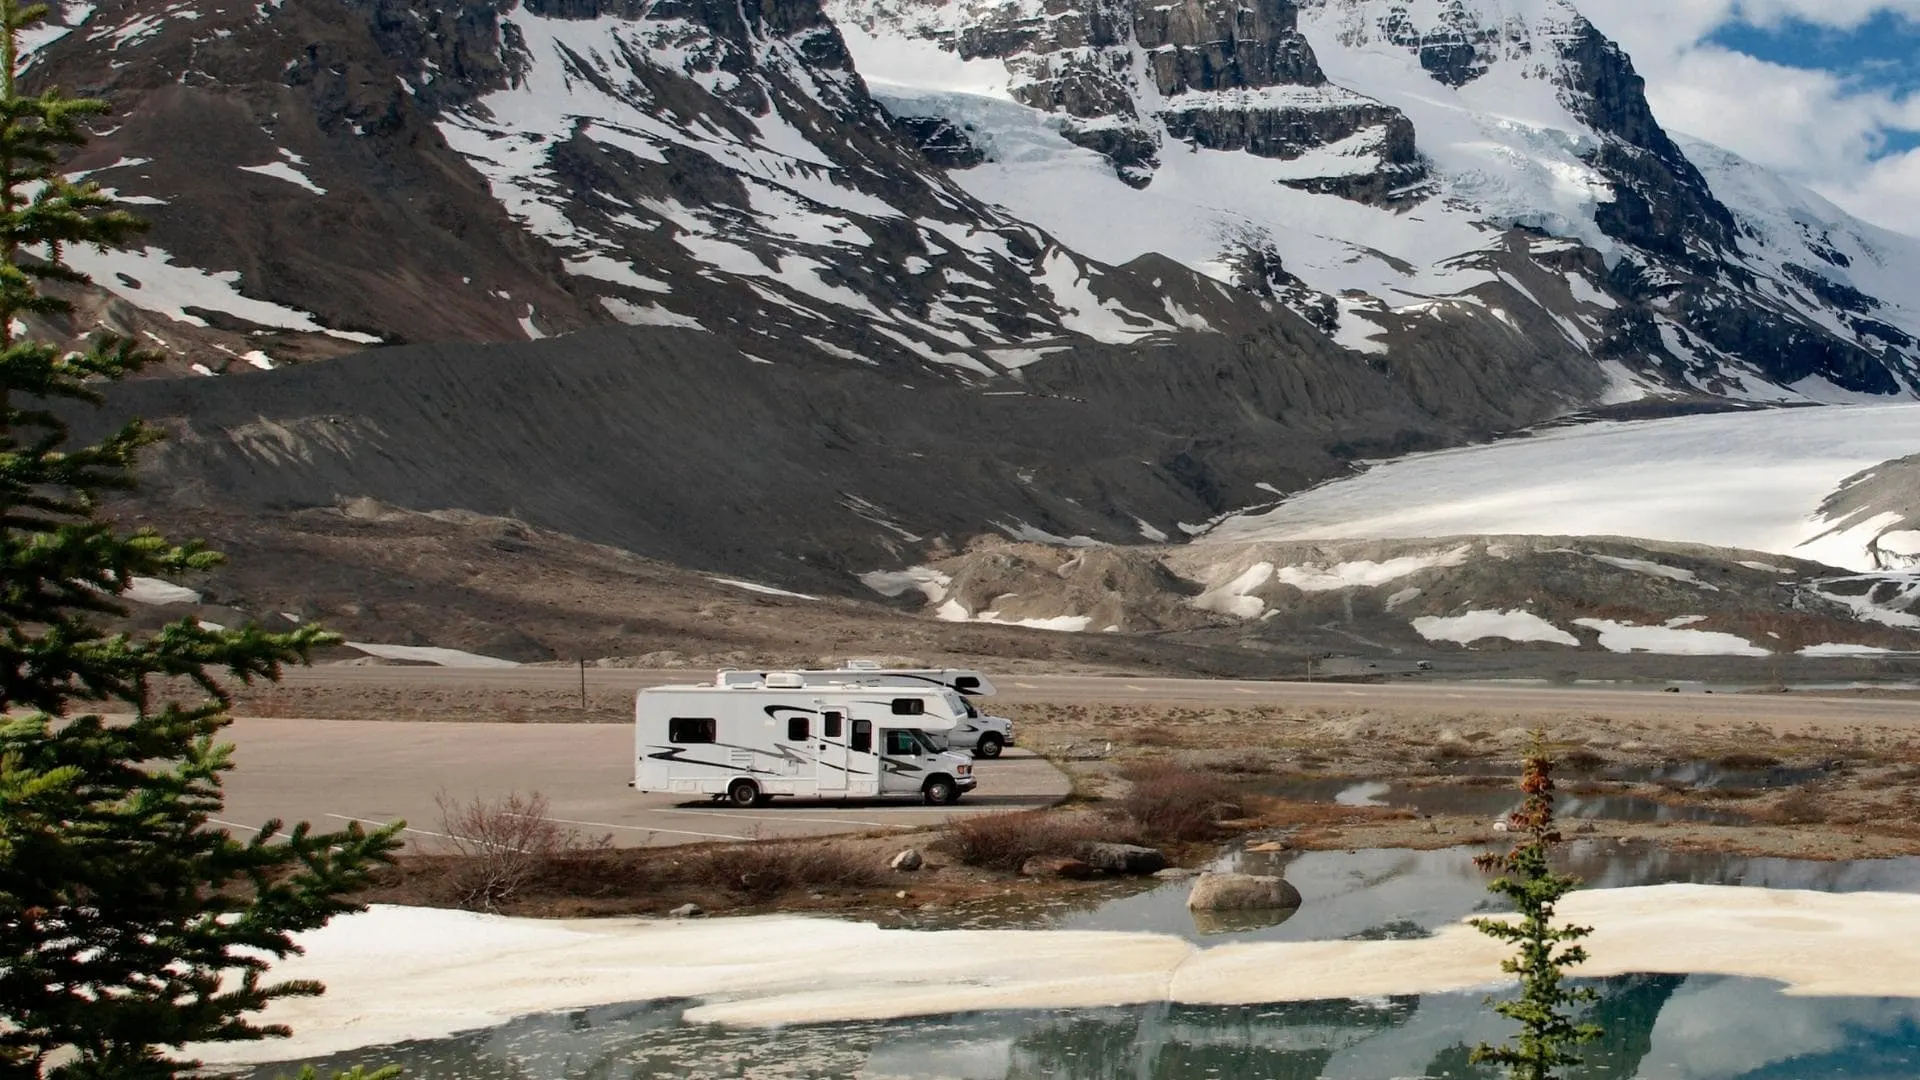 Photo of RVs boondocking on land below snow-covered mountains